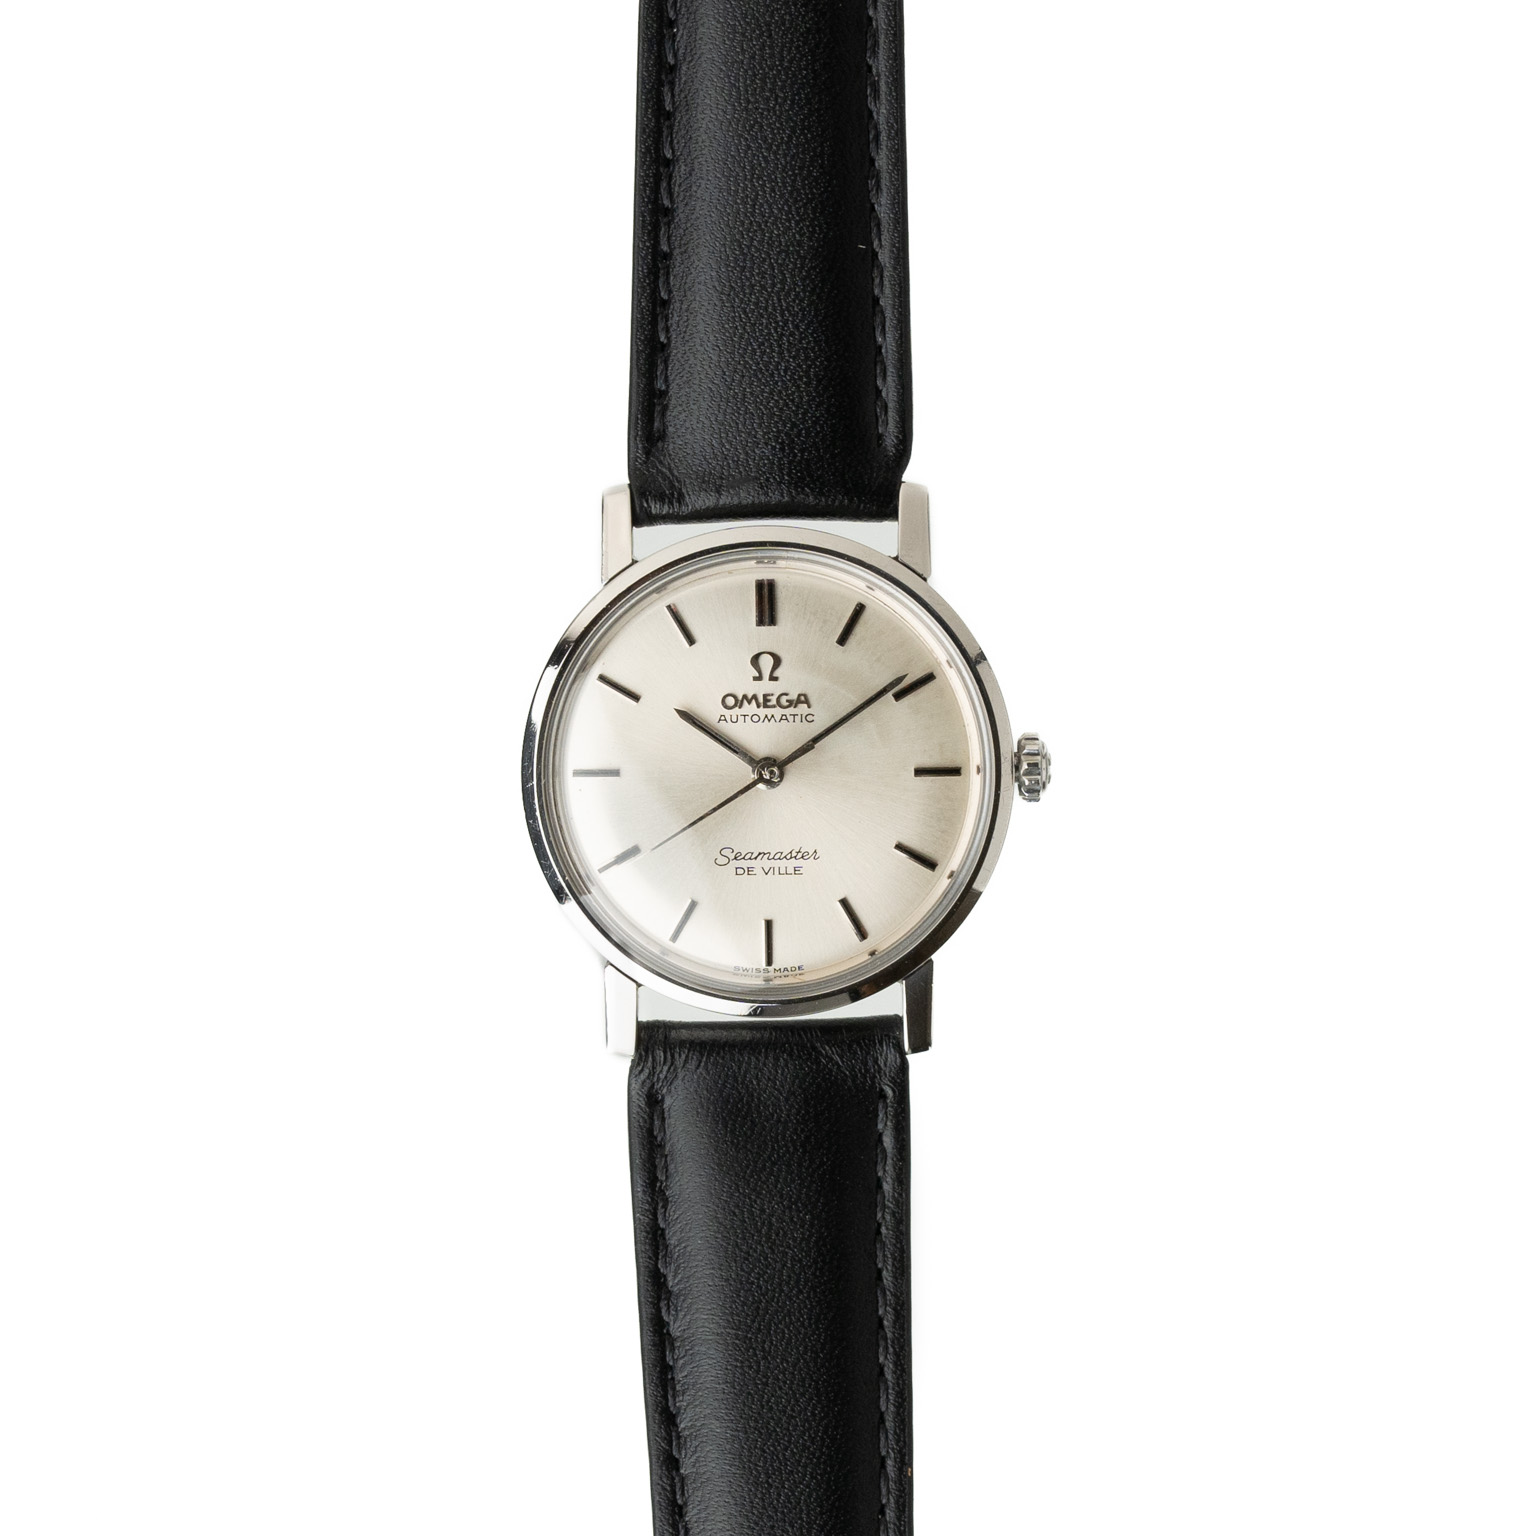 Omega Seamaster de ville mid-size unisex 165.004 from 1960s front